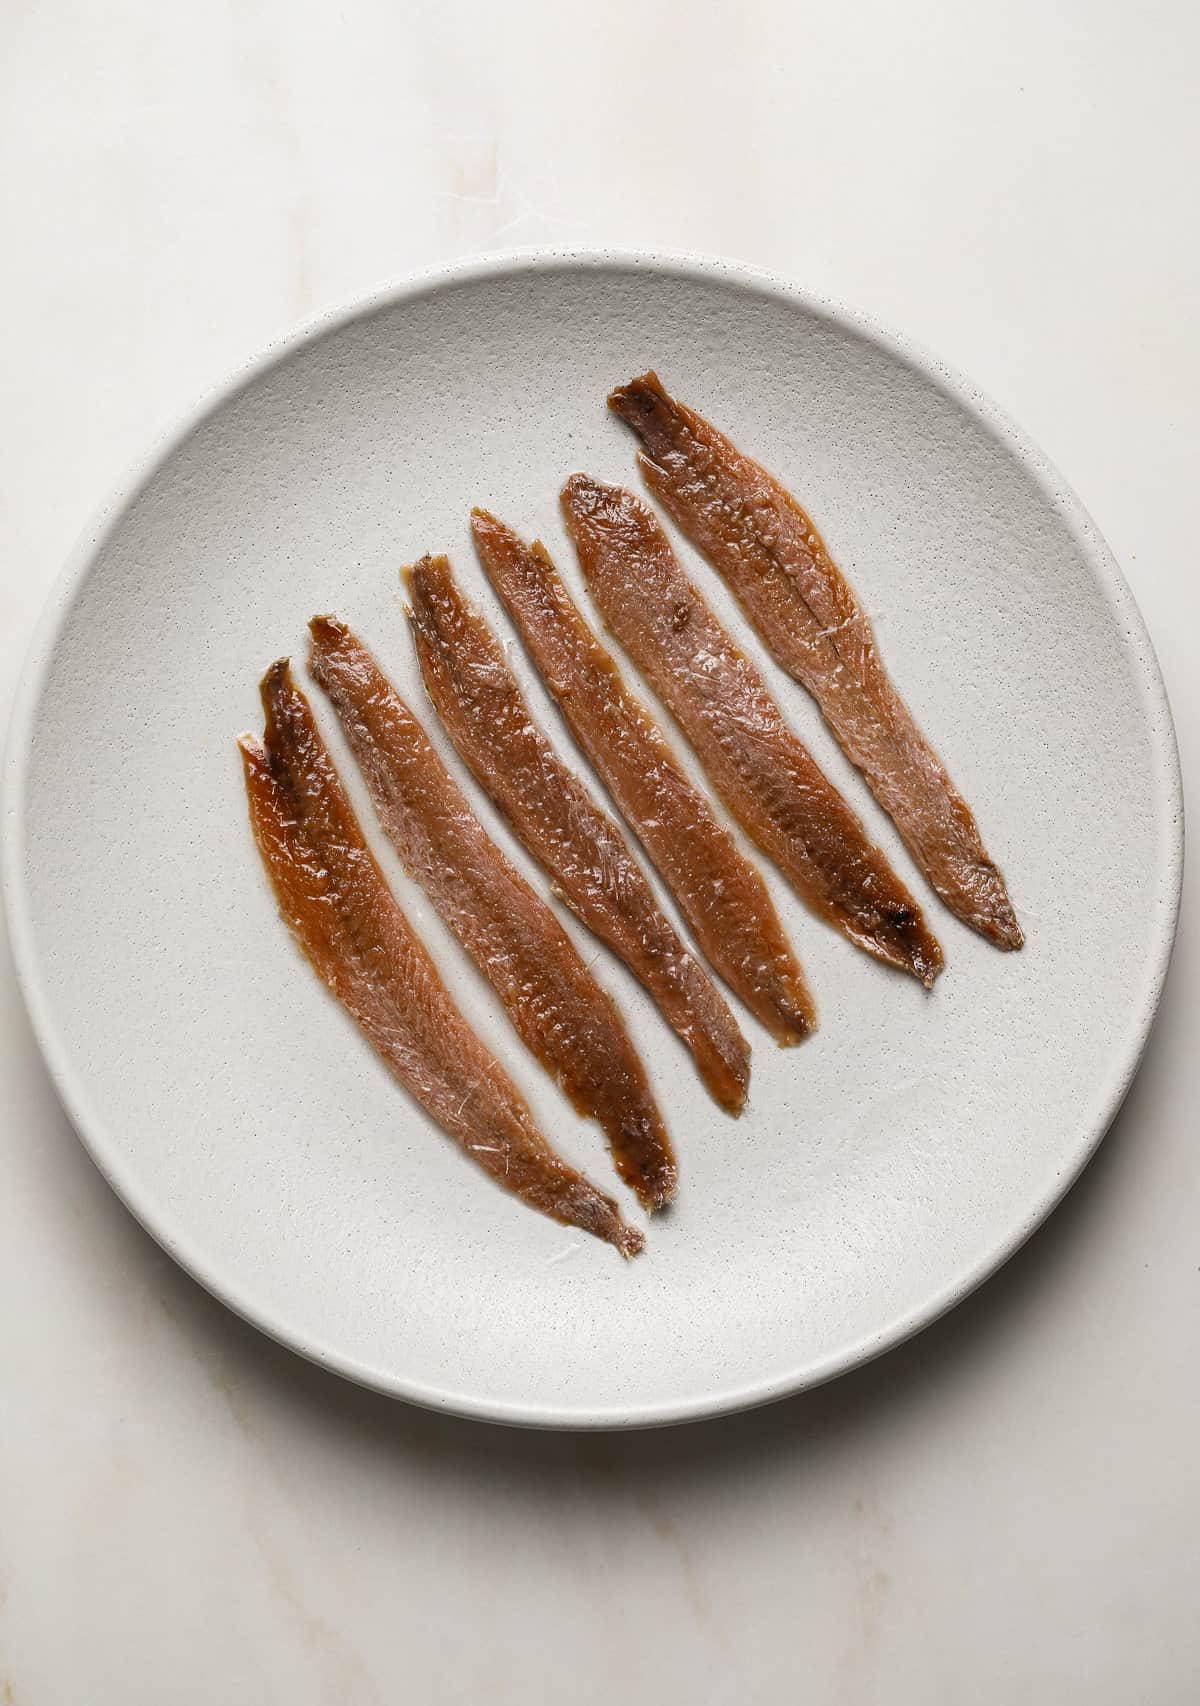 A plate of filled with 6 brown anchovies.